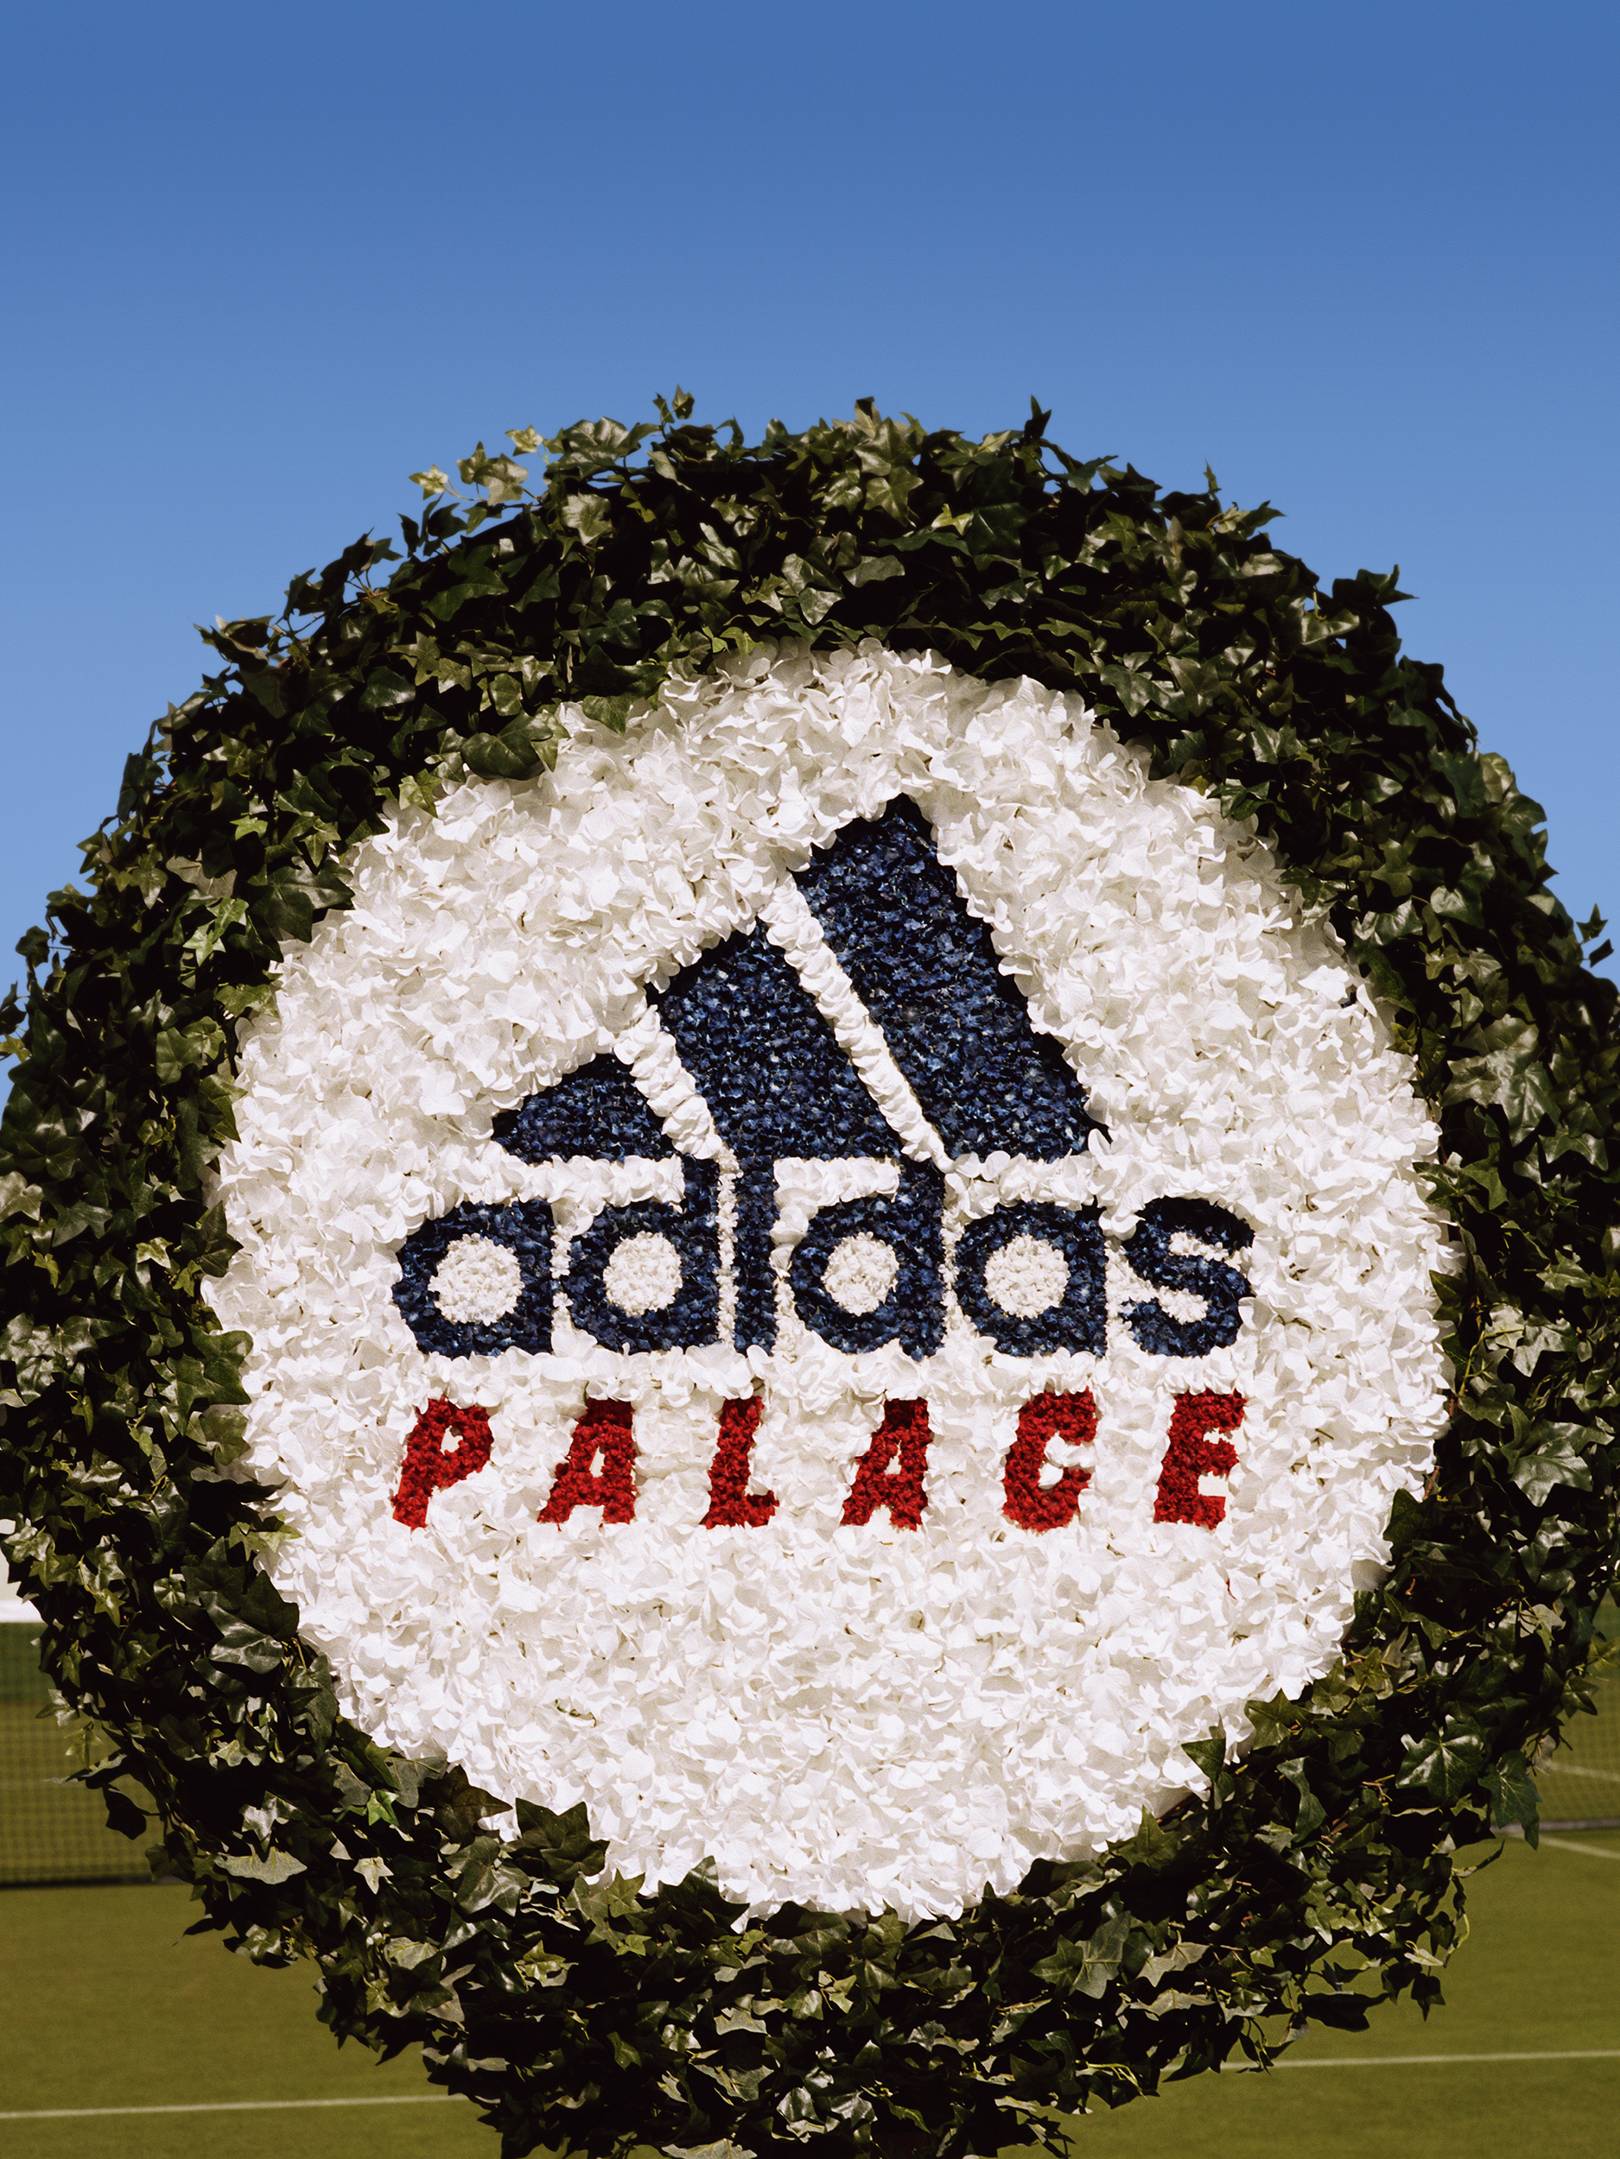 Palace Adidas Logo - Adidas And Palace Team Up For Tennis Collection | British Vogue